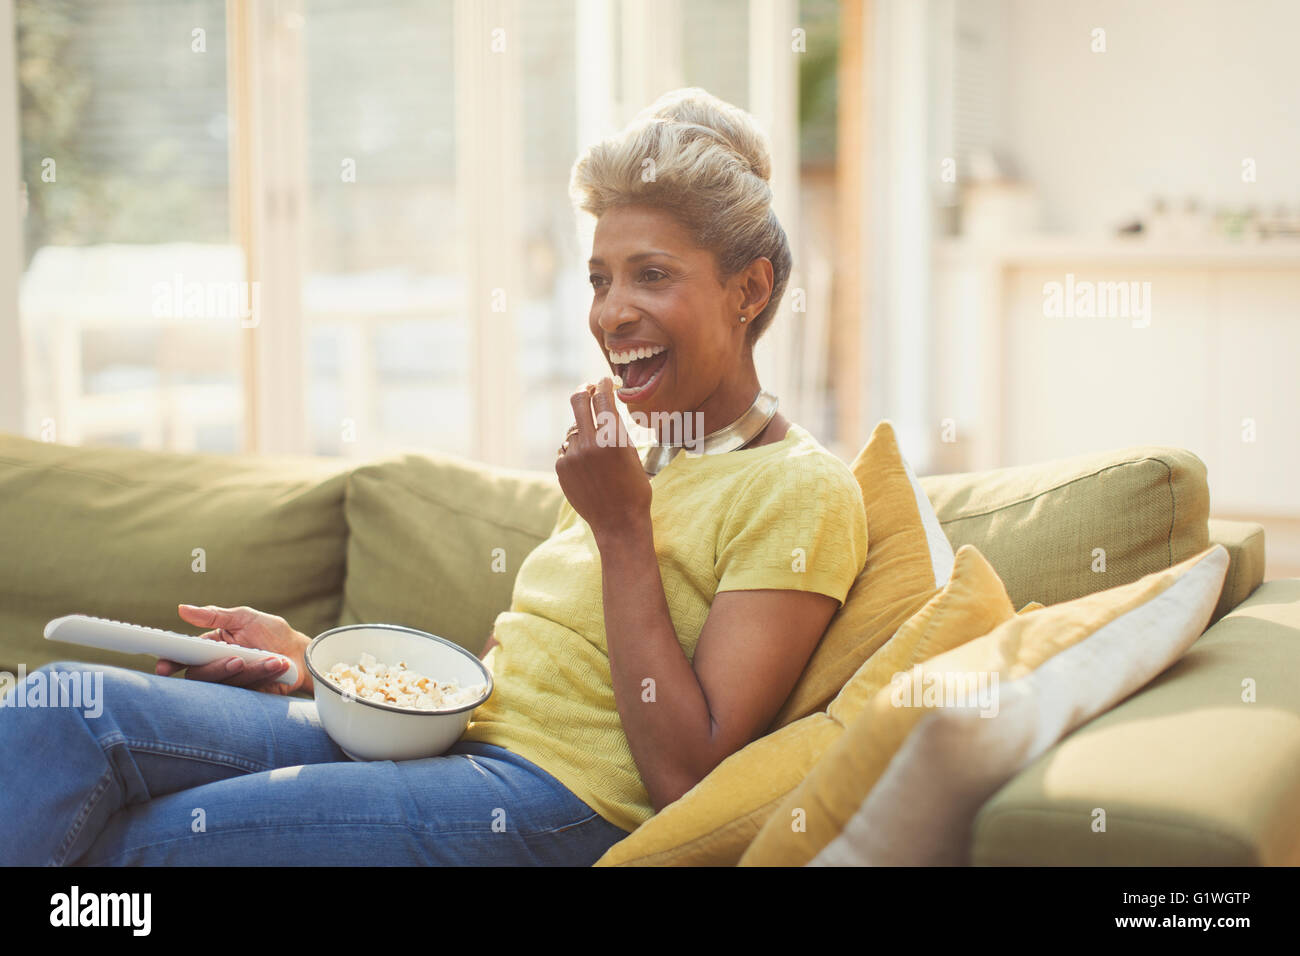 Mature woman eating popcorn and watching TV on living room sofa Stock Photo